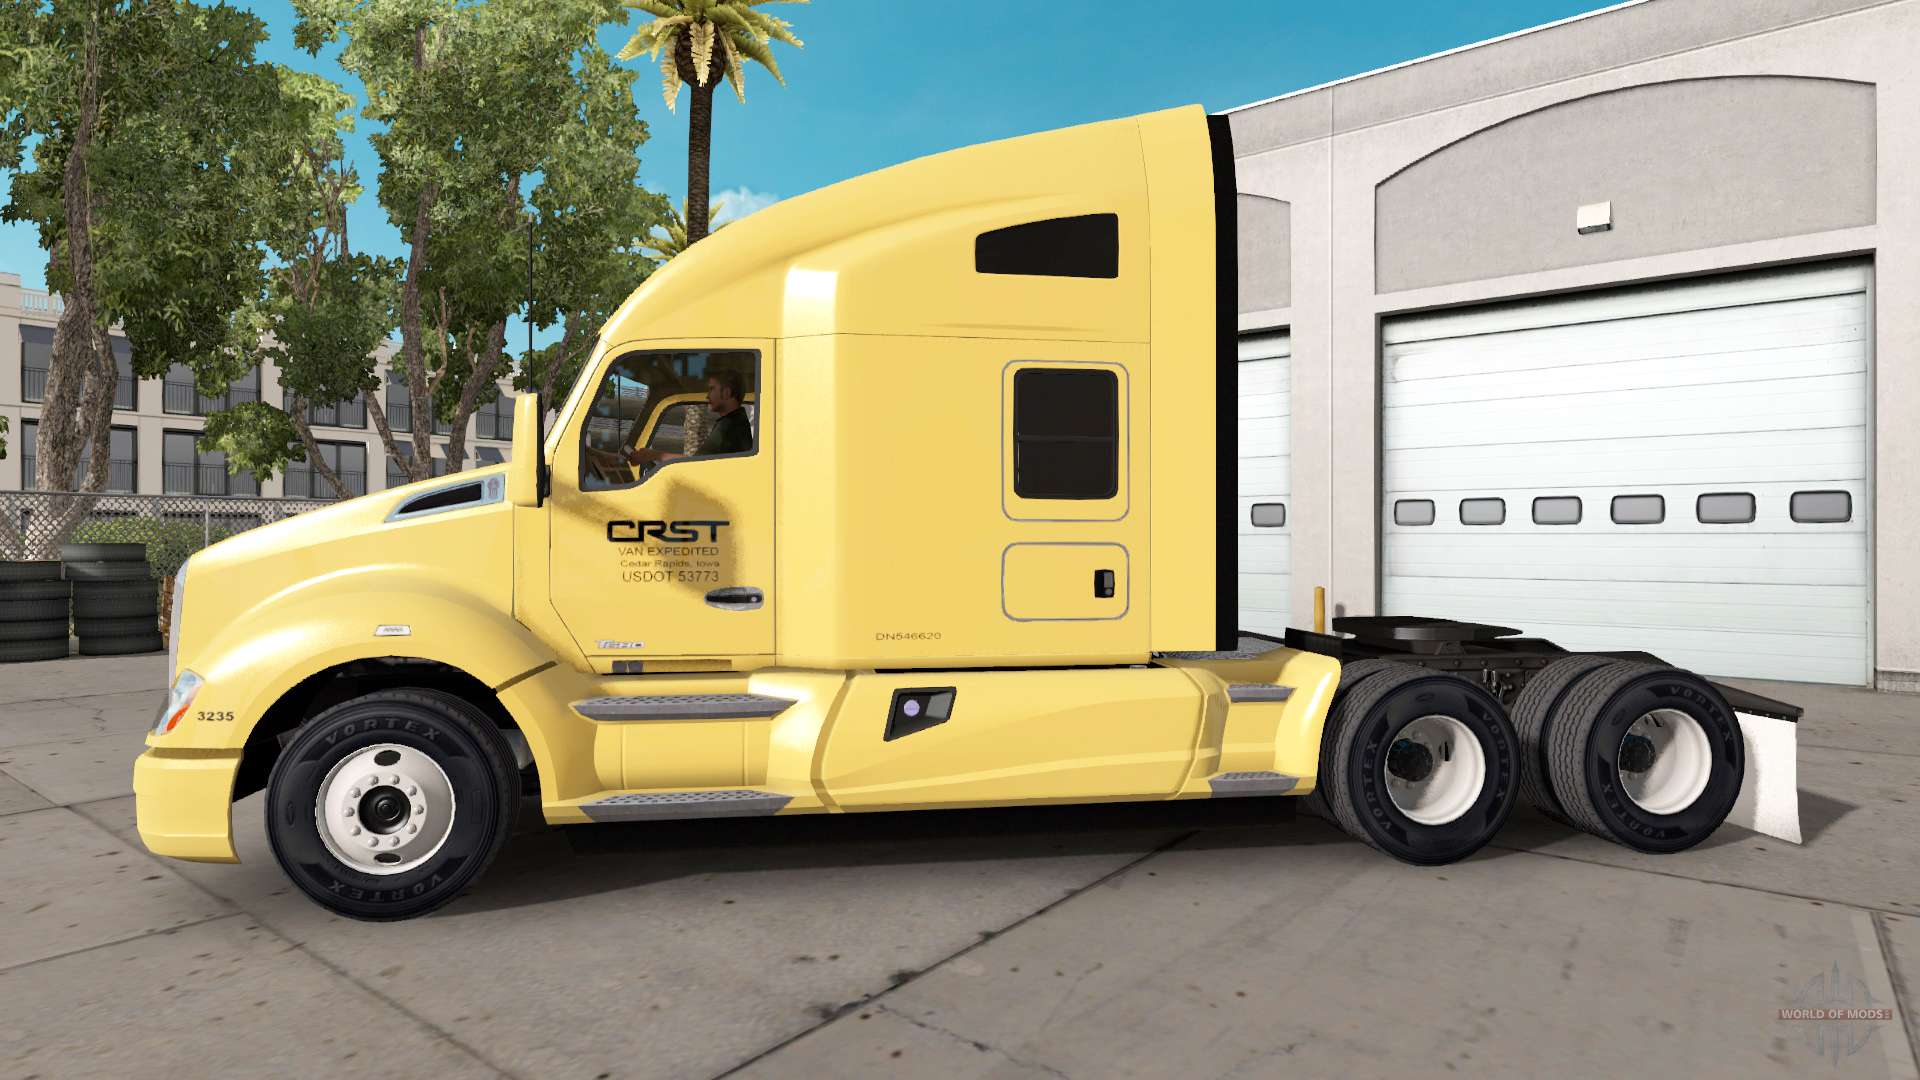 What are some features of CRST expedited trucking?